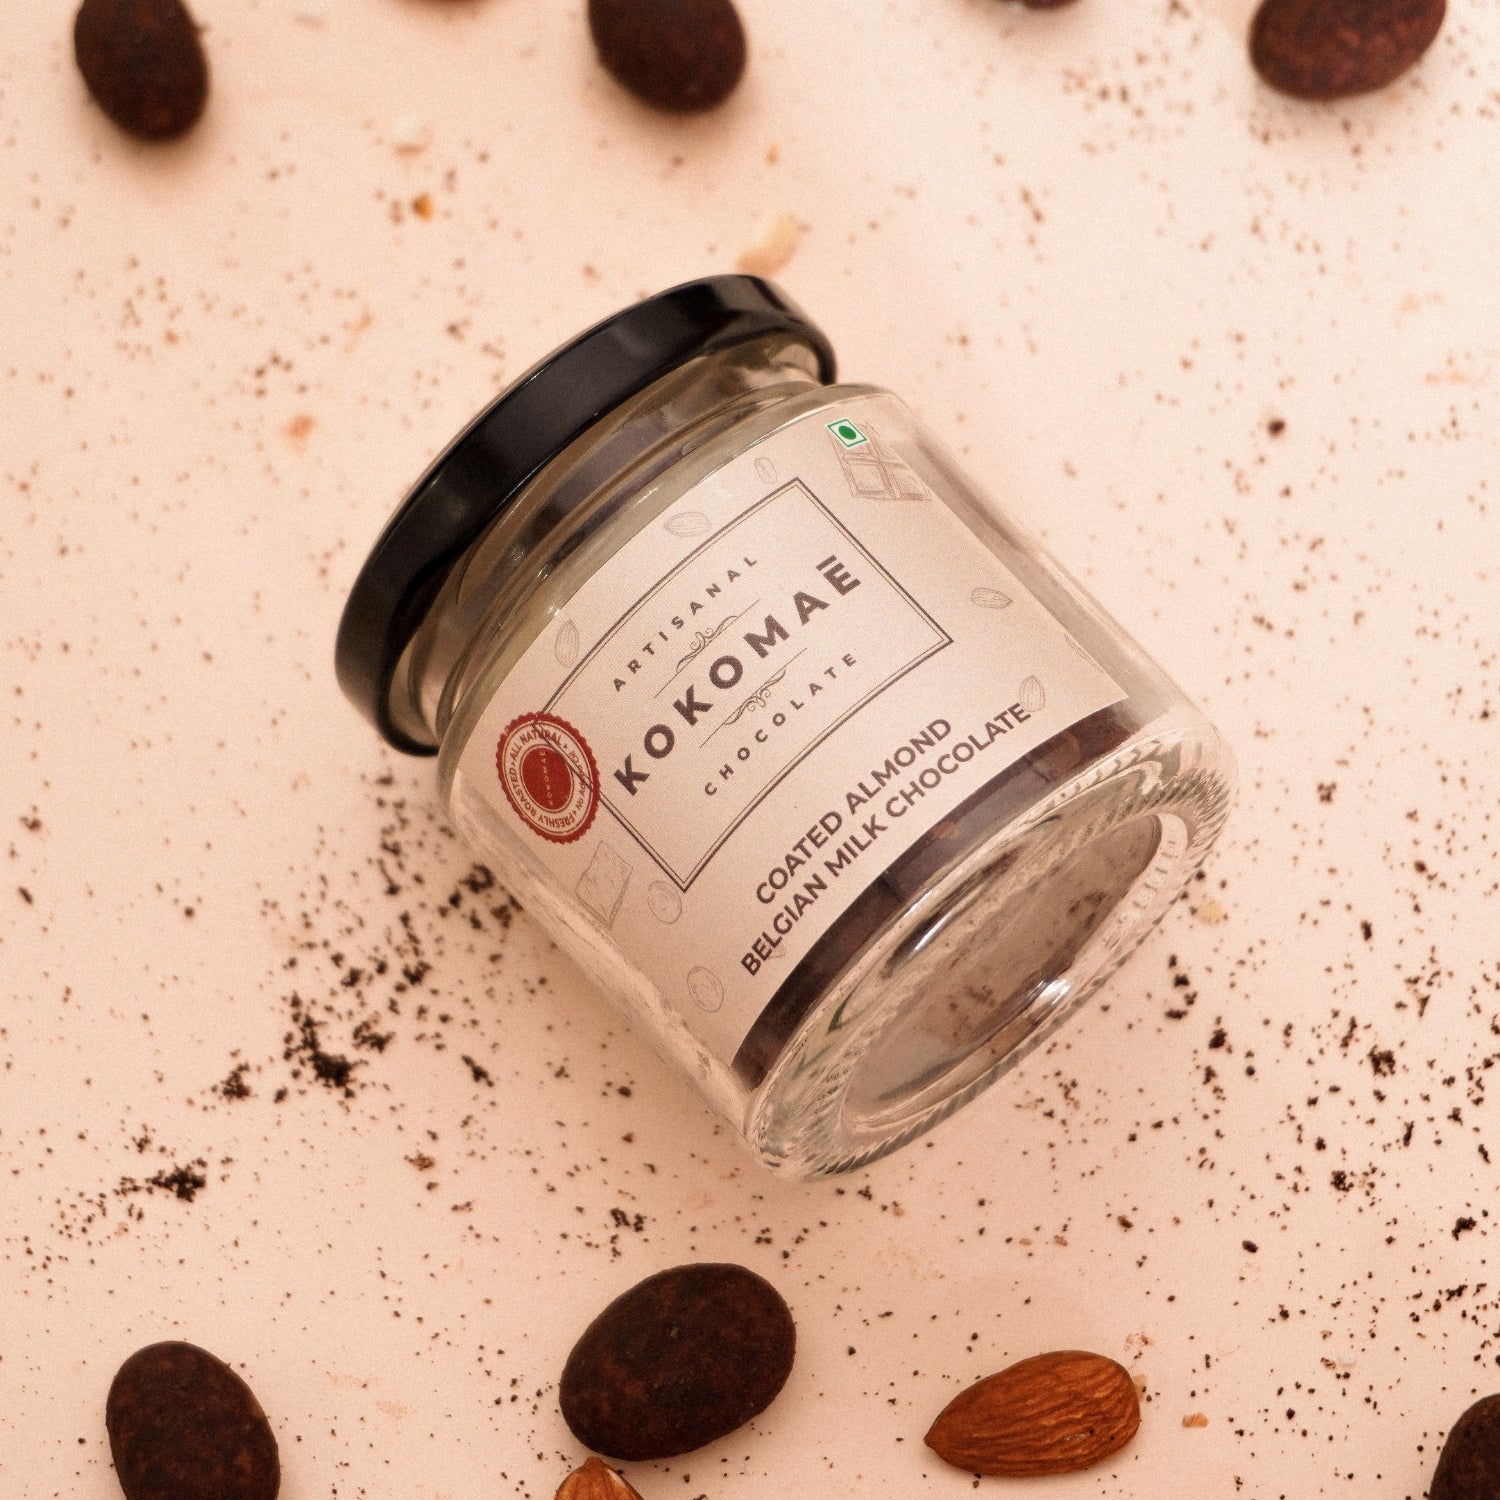 Kokomaē Premium Coated Almond in Smooth Chocolate & a Candle for Diwali